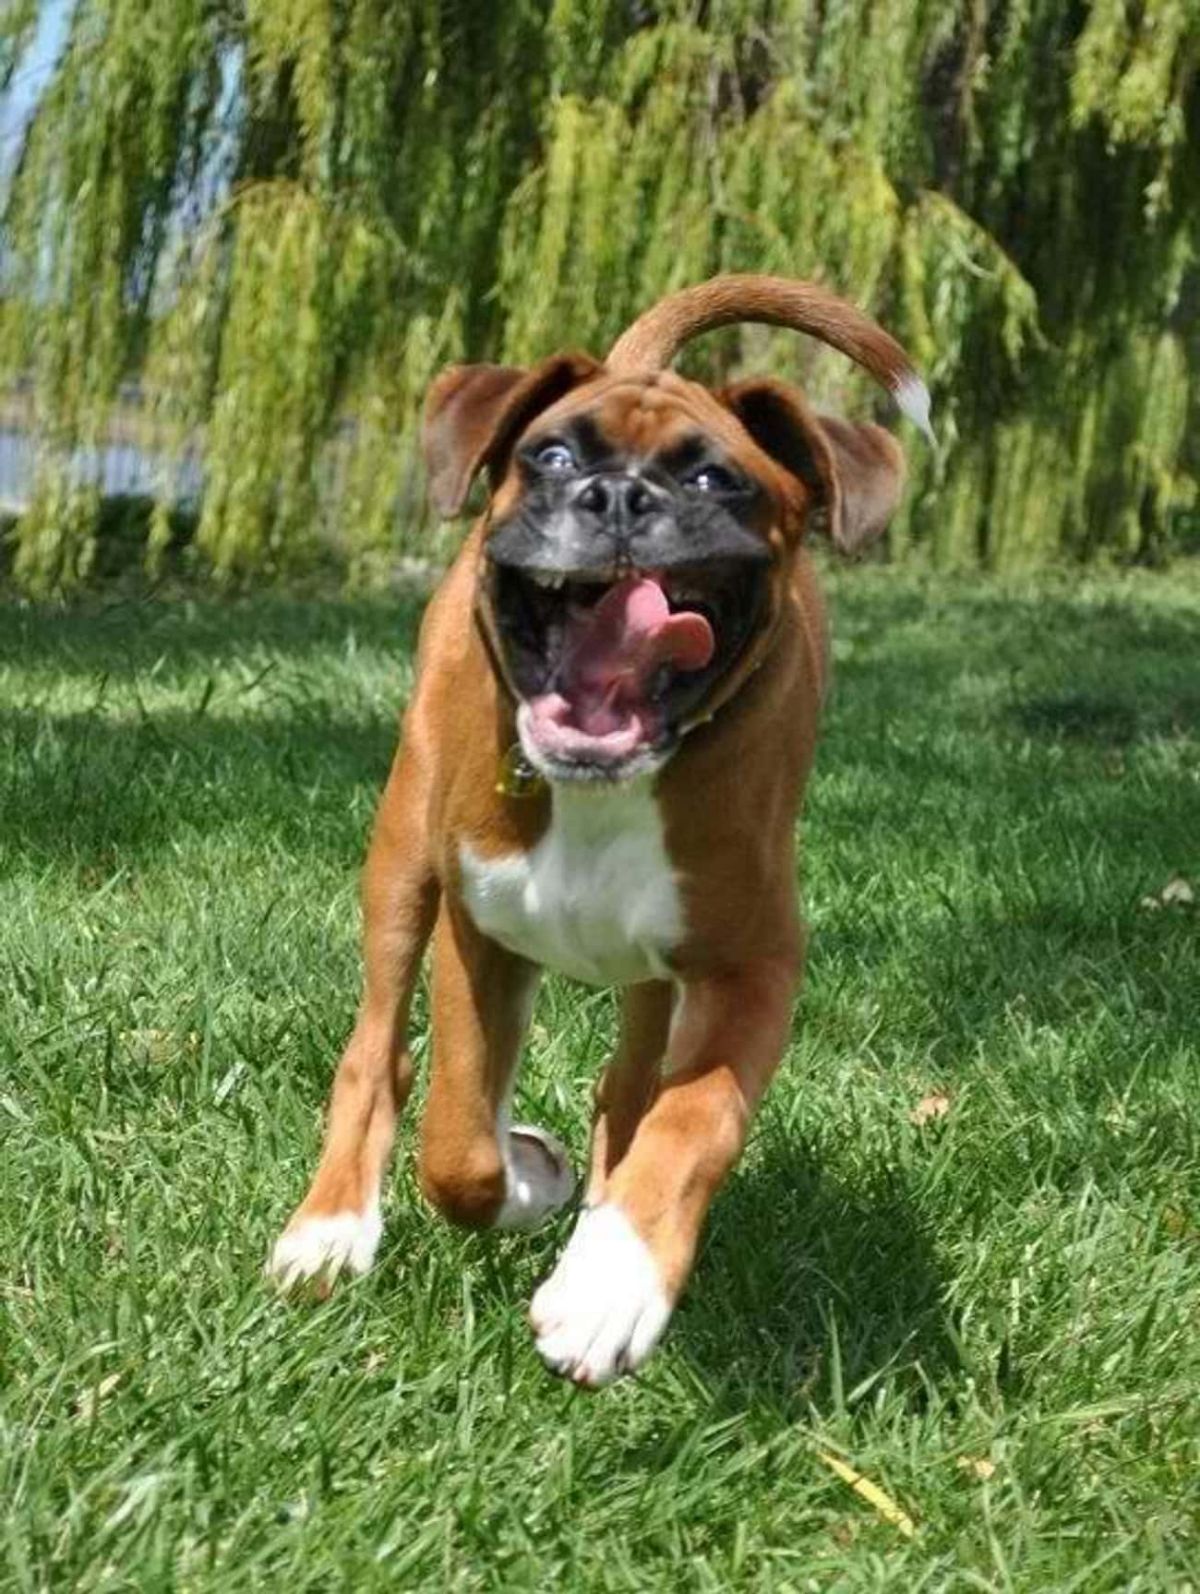 brown and white boxer caught mid-run on grass with the tongue out and jowls moving up